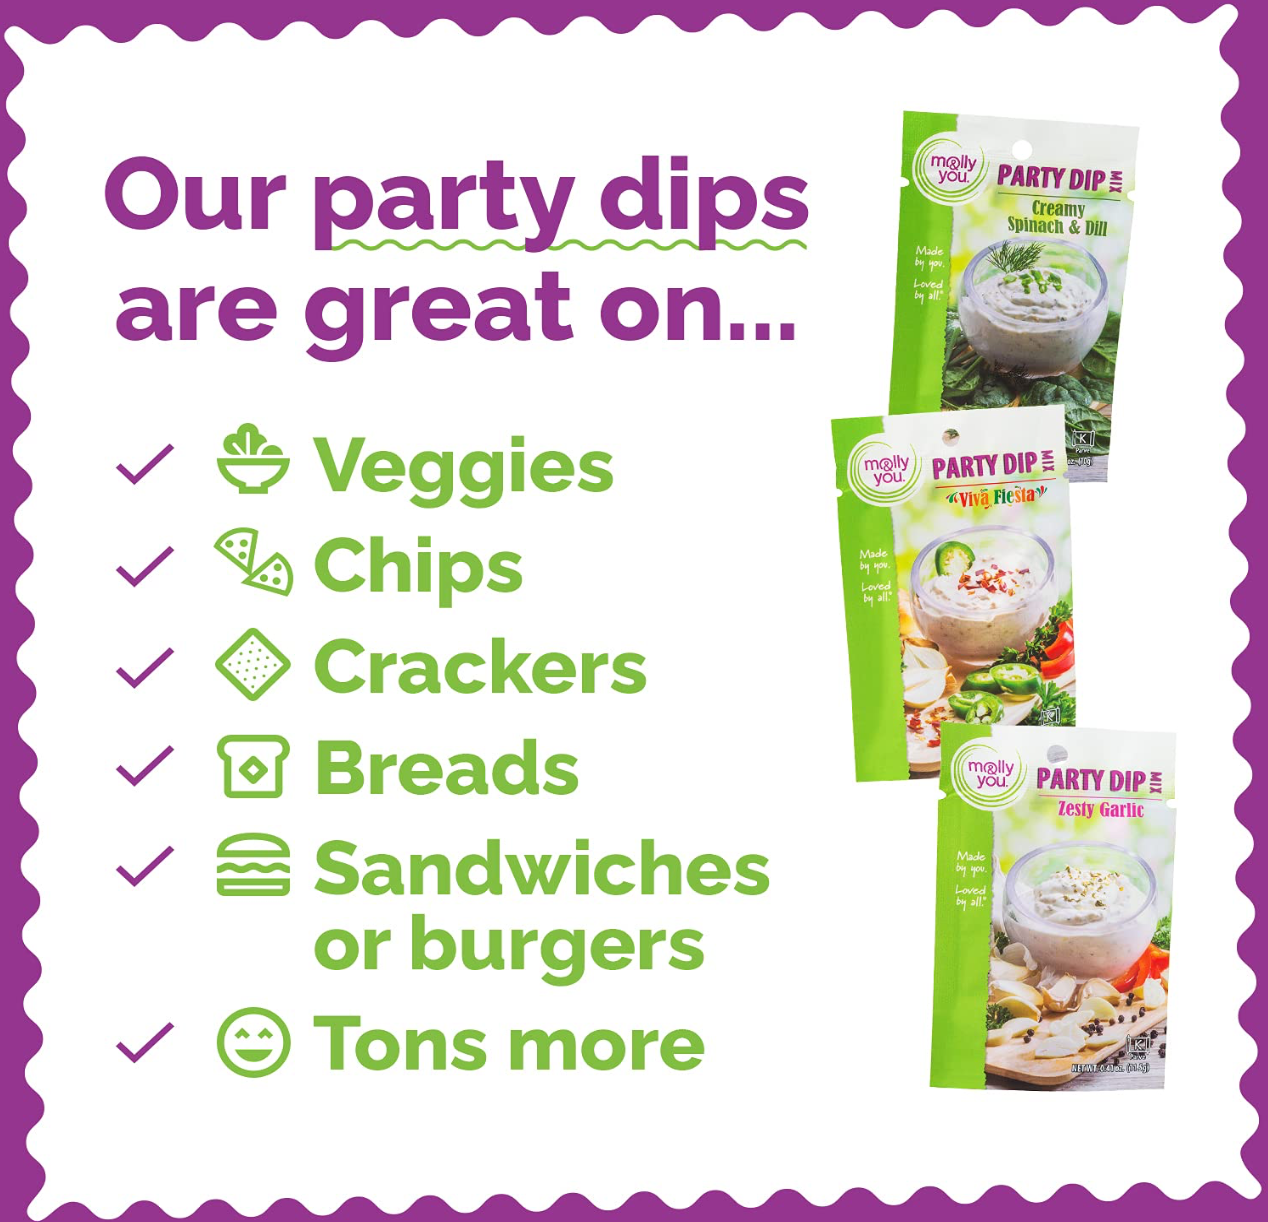 Party Dips are great on veggies, chips, crackers, breads, sandwiches, and tons more!